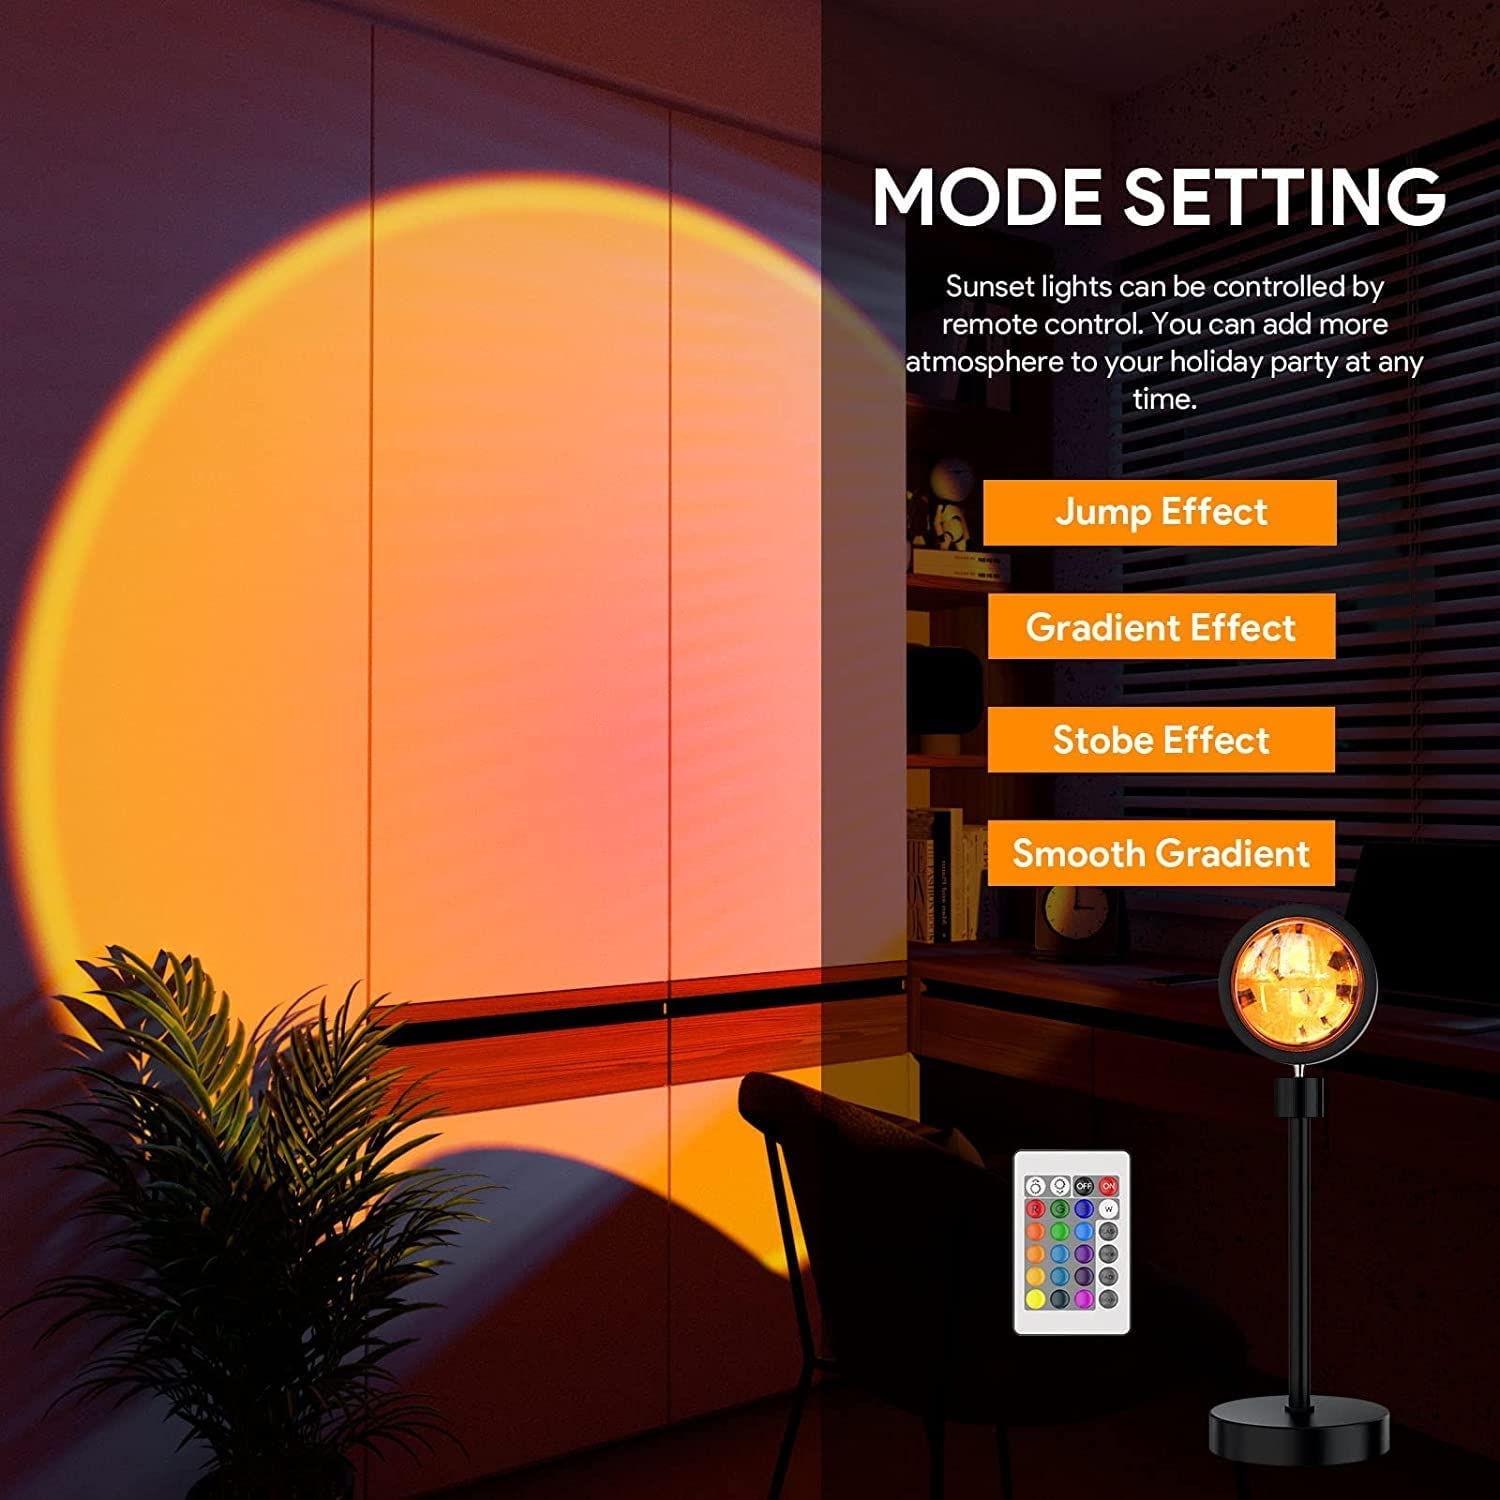 Sunset Magic: 16 Colors Sunset Projection Lamp with Remote